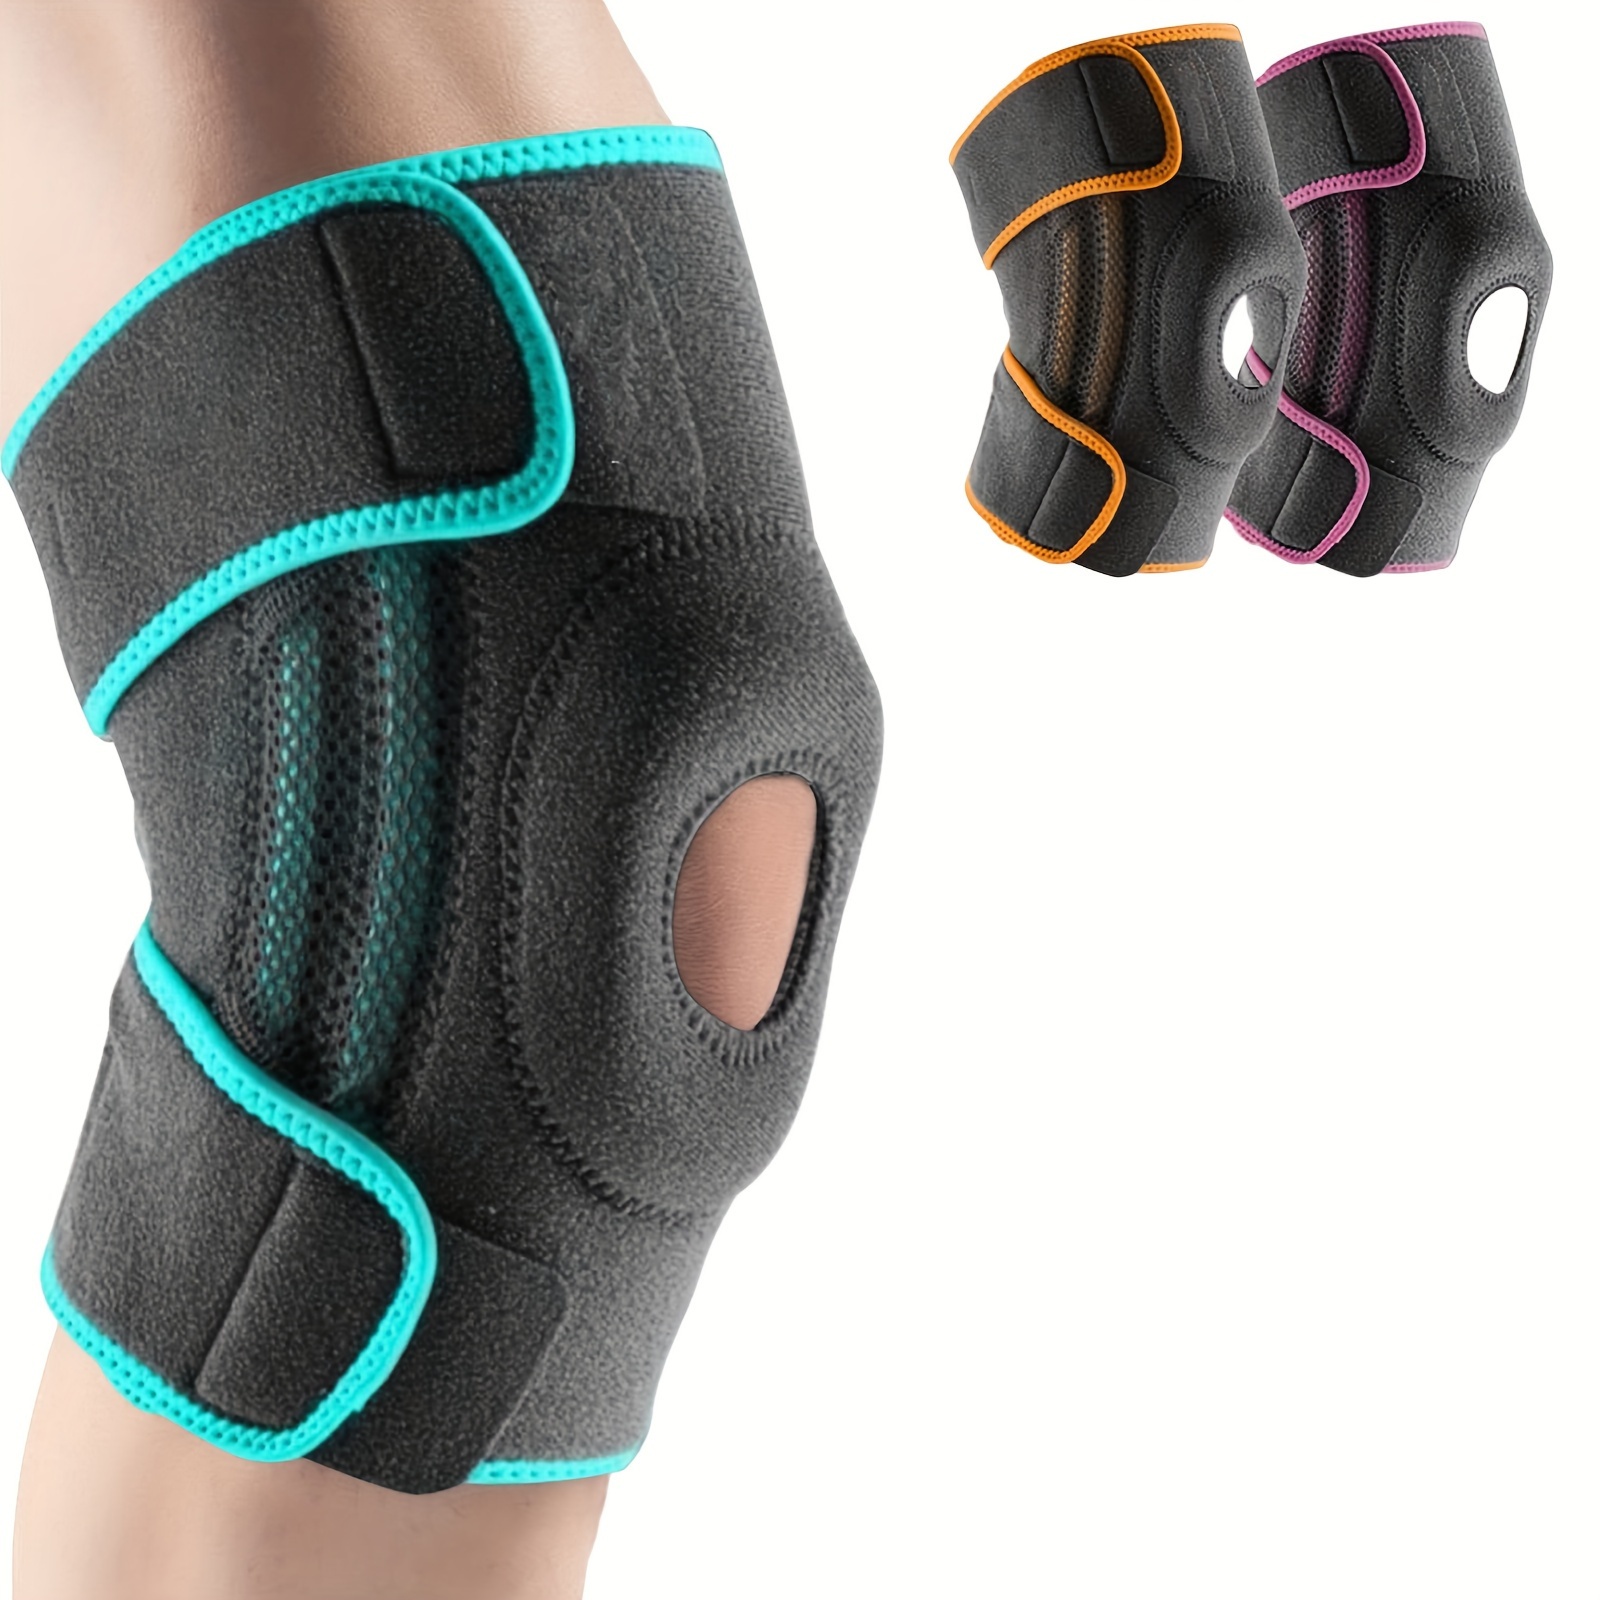 Professional Compression Sports Knee Brace Support with Patella